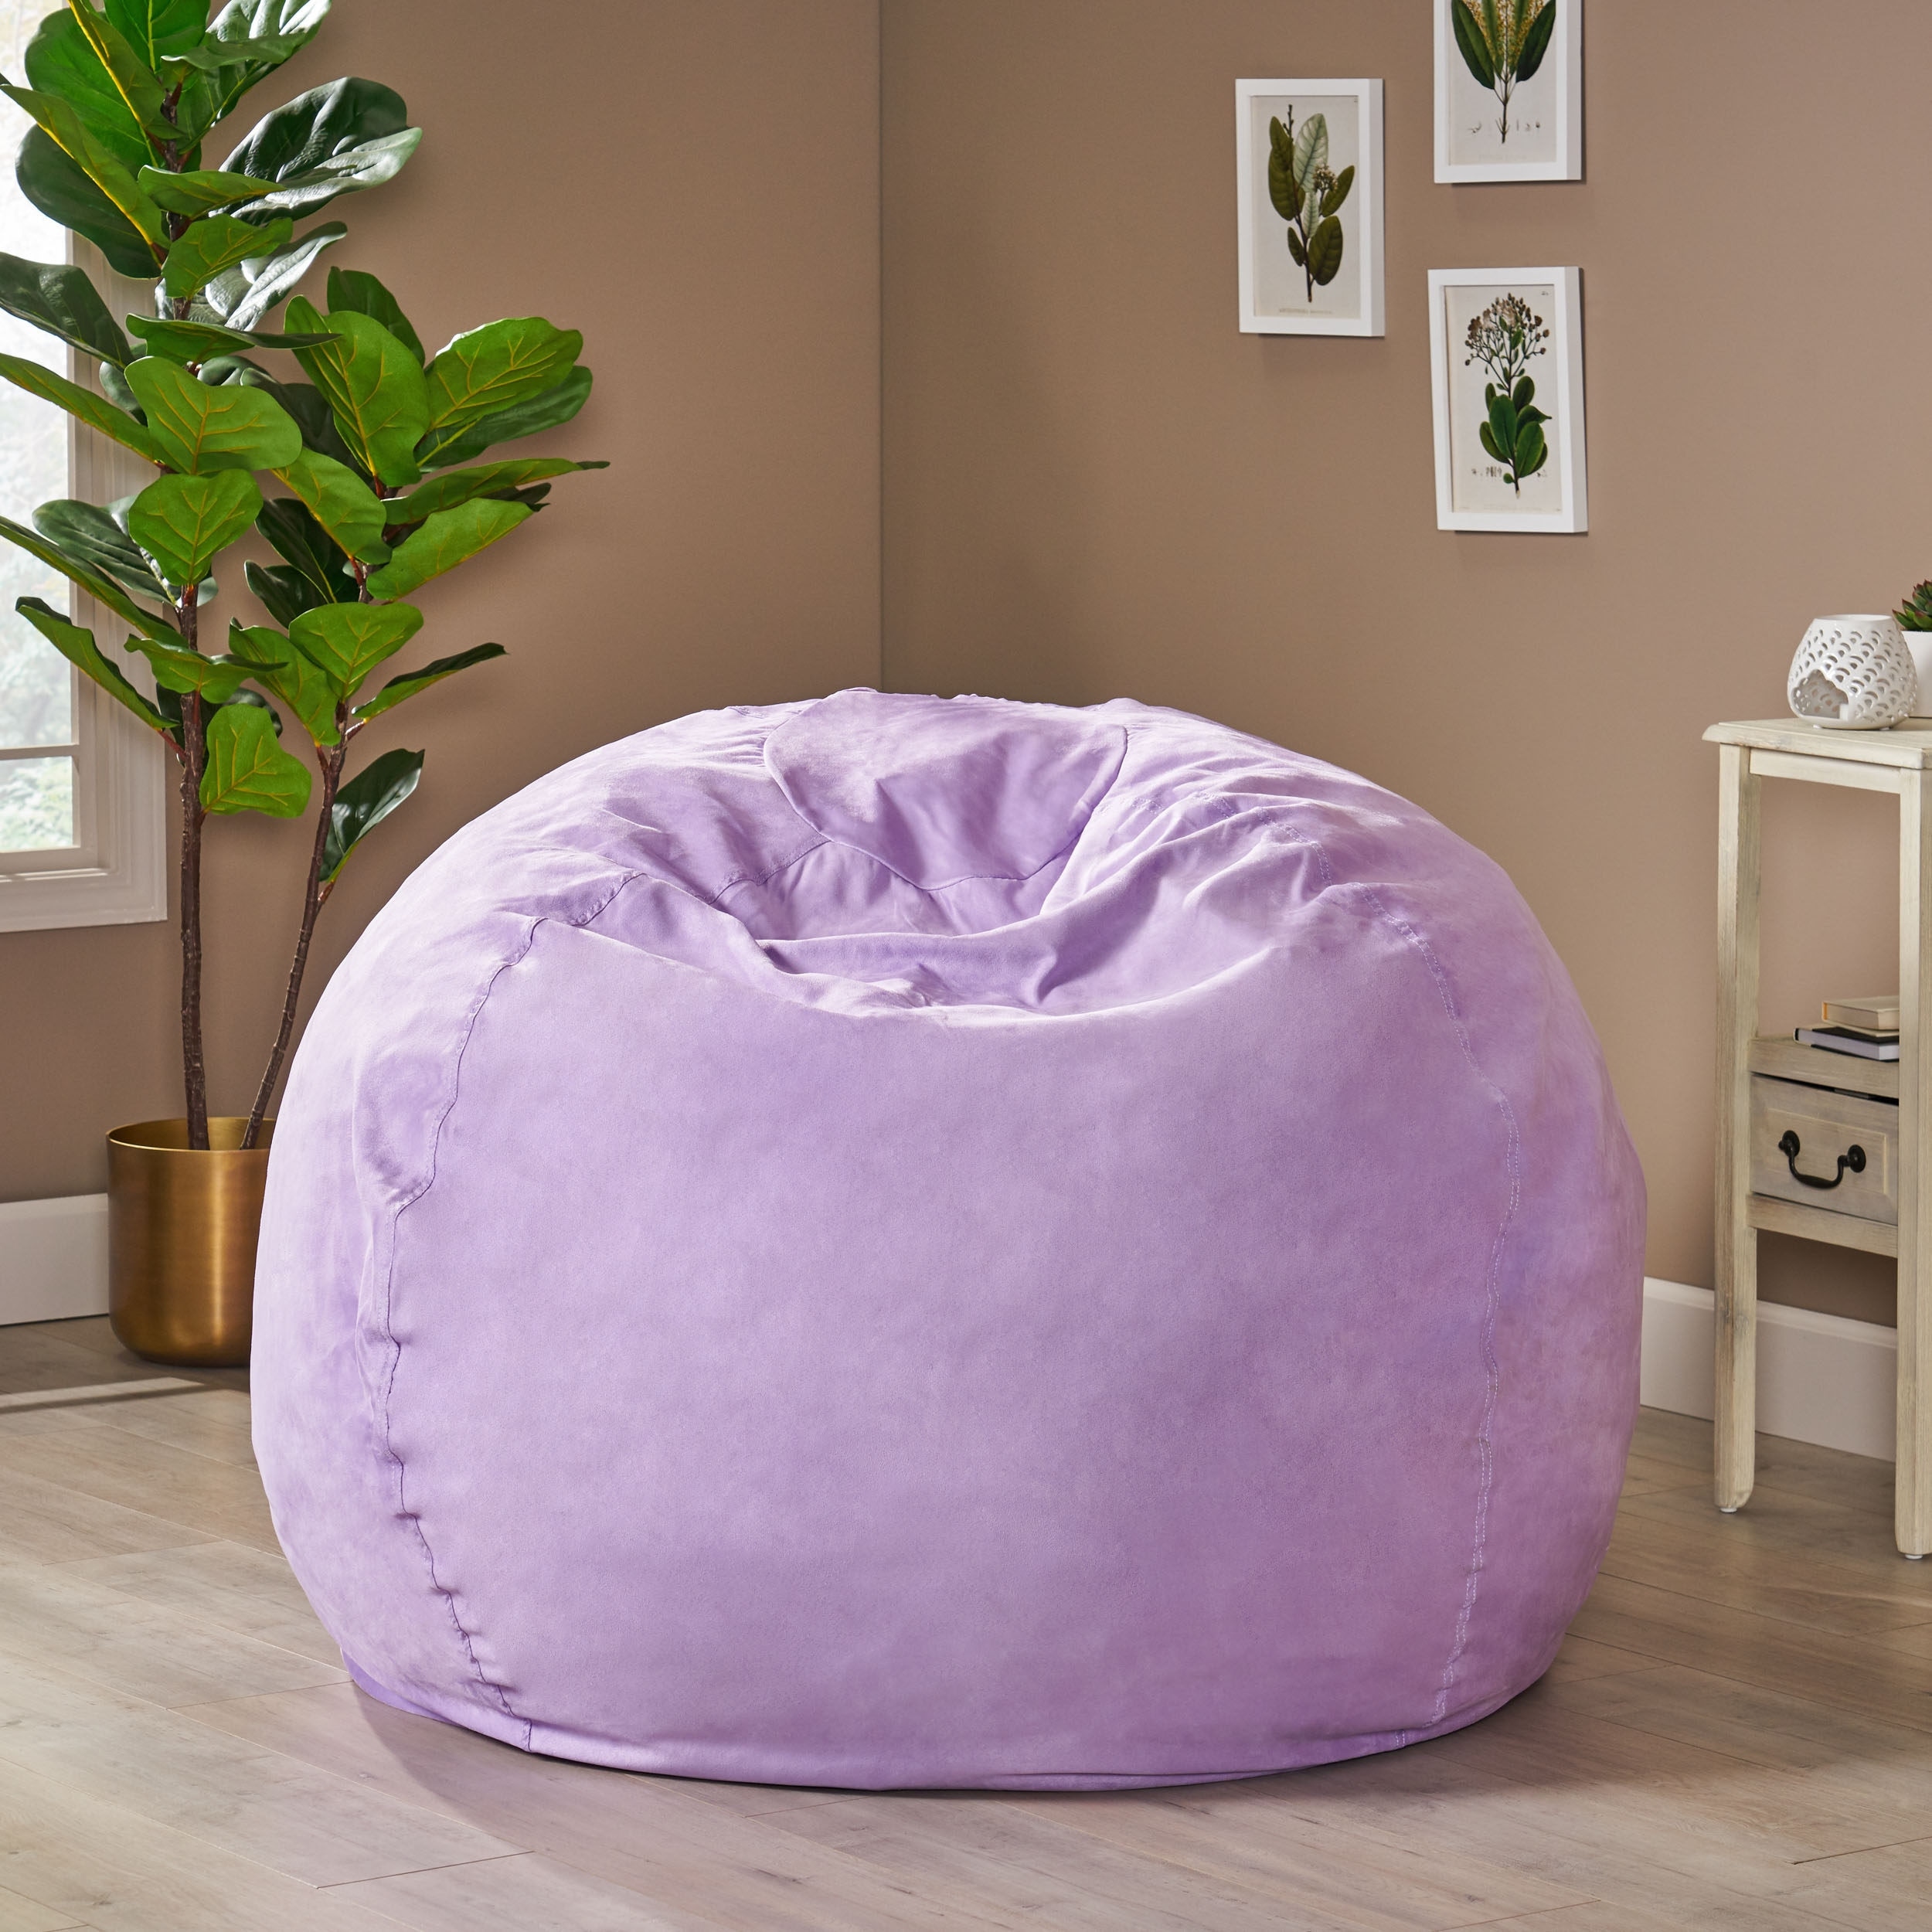 Cotton Lazy Sofa Cover cloth cover Bean Bag Sofa Cover Sofa Coat  Removable Washable Liner  Price history  Review  AliExpress Seller   NatureBell Store  Alitoolsio